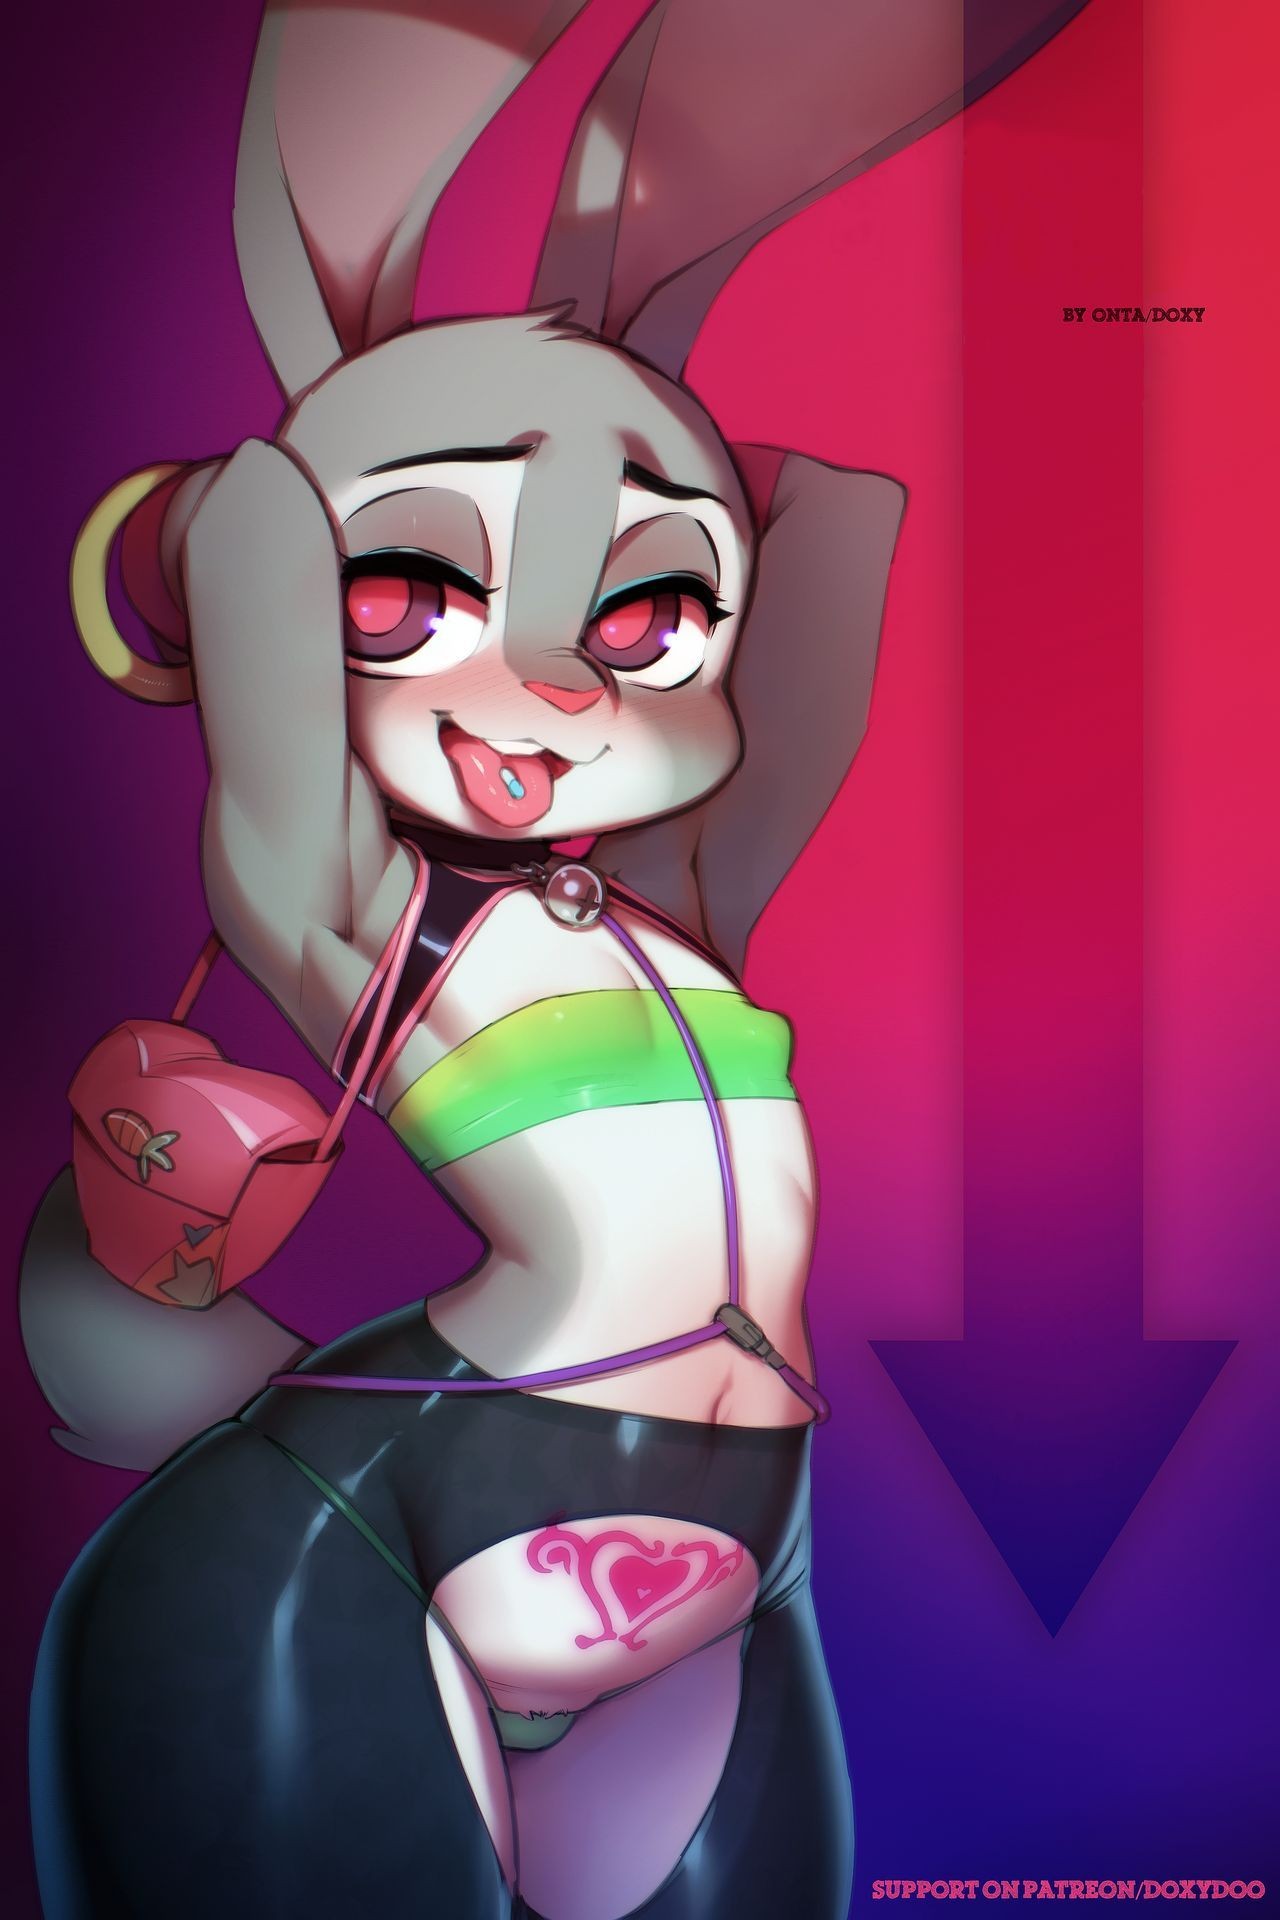 Sex Massage [Doxy] Sweet Sting Part 2: Down The Rabbit Hole (Zootopia) [Textless] [Ongoing] Squirting